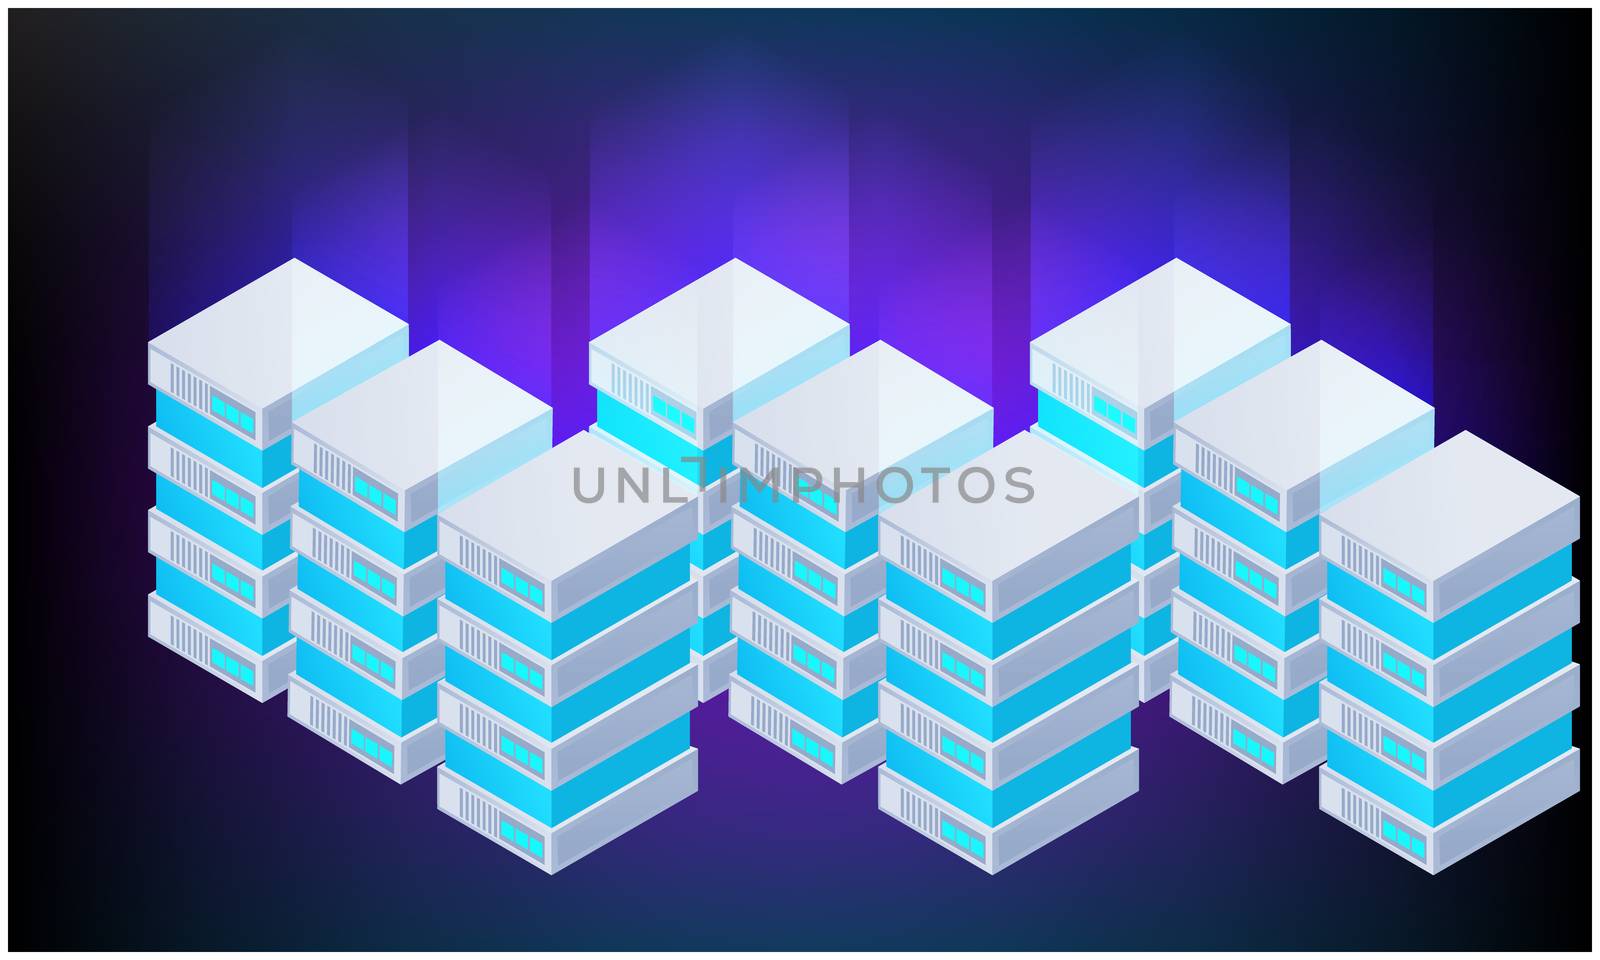 digital textile design of boxes on abstract background by aanavcreationsplus